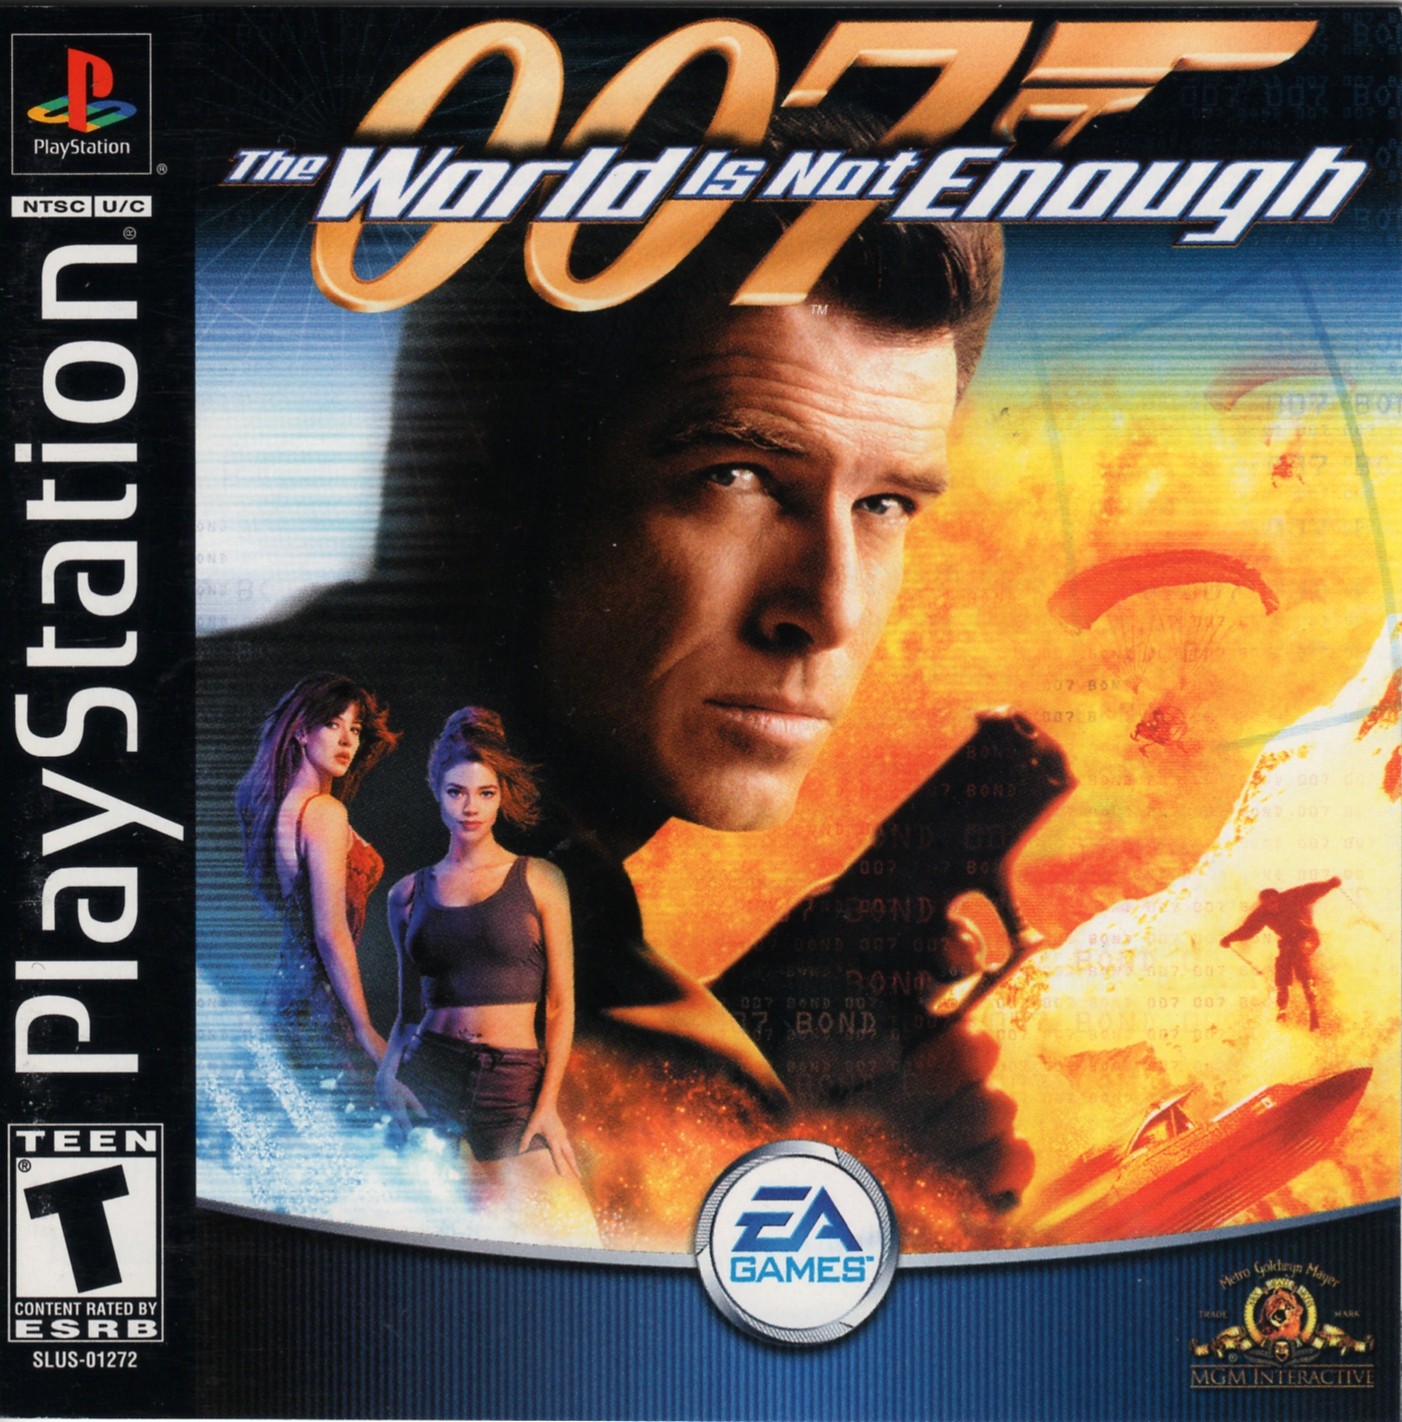 007 - The World is not enough PSX cover